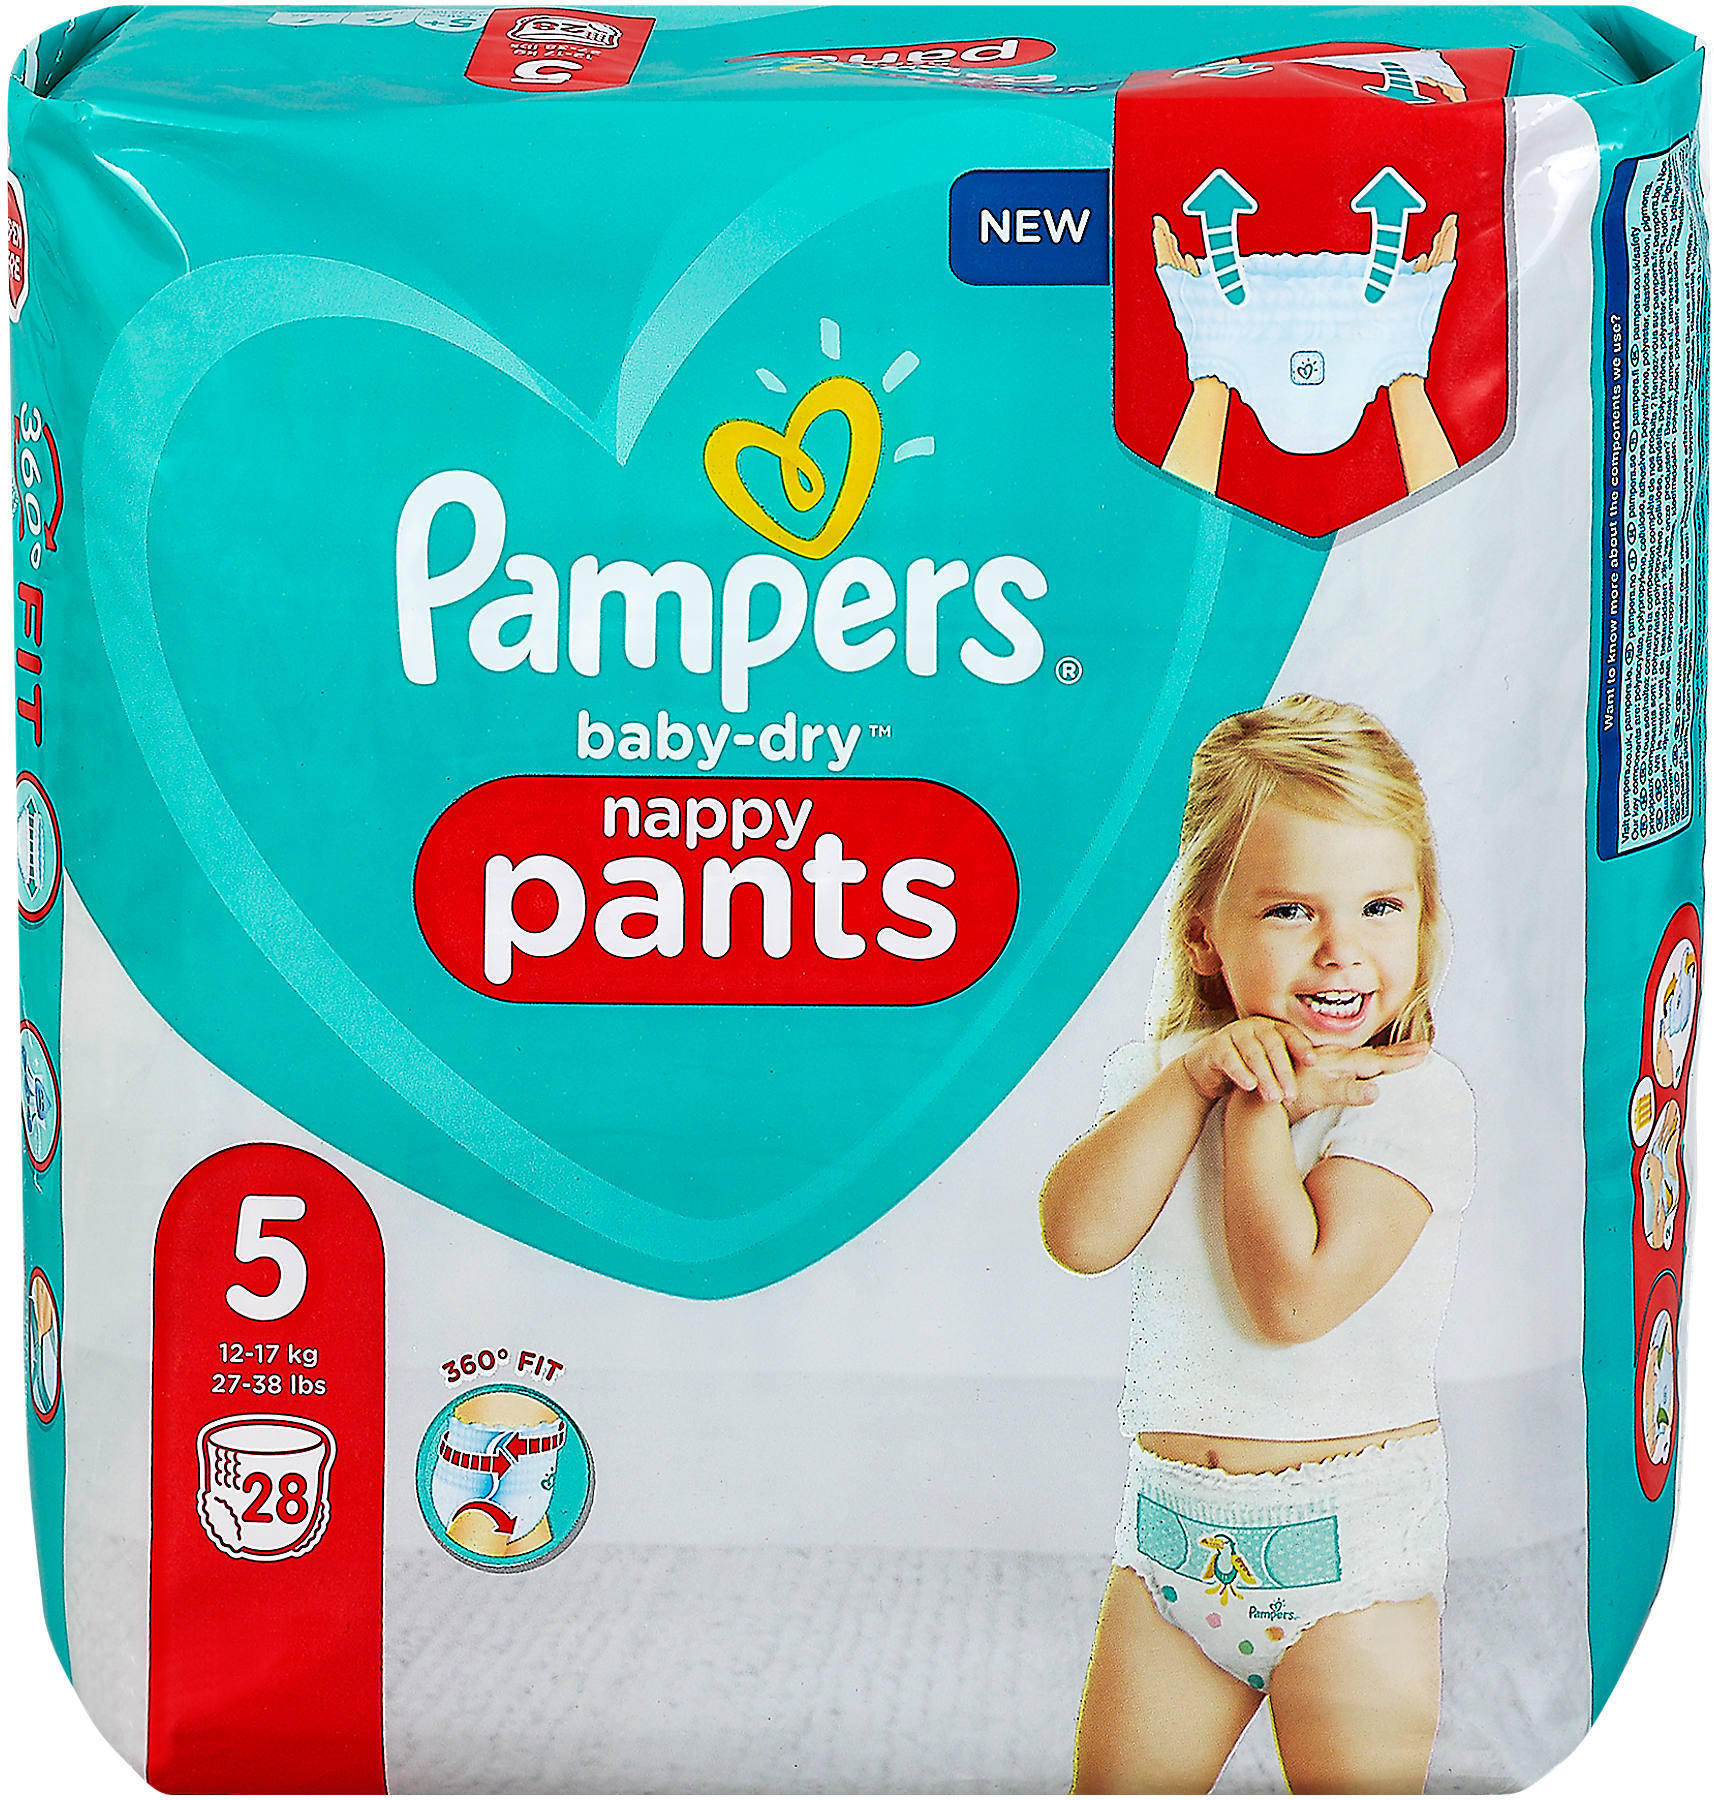 3 31St Windeln 2x Pampers Baby-Dry nappy PANTS Gr 